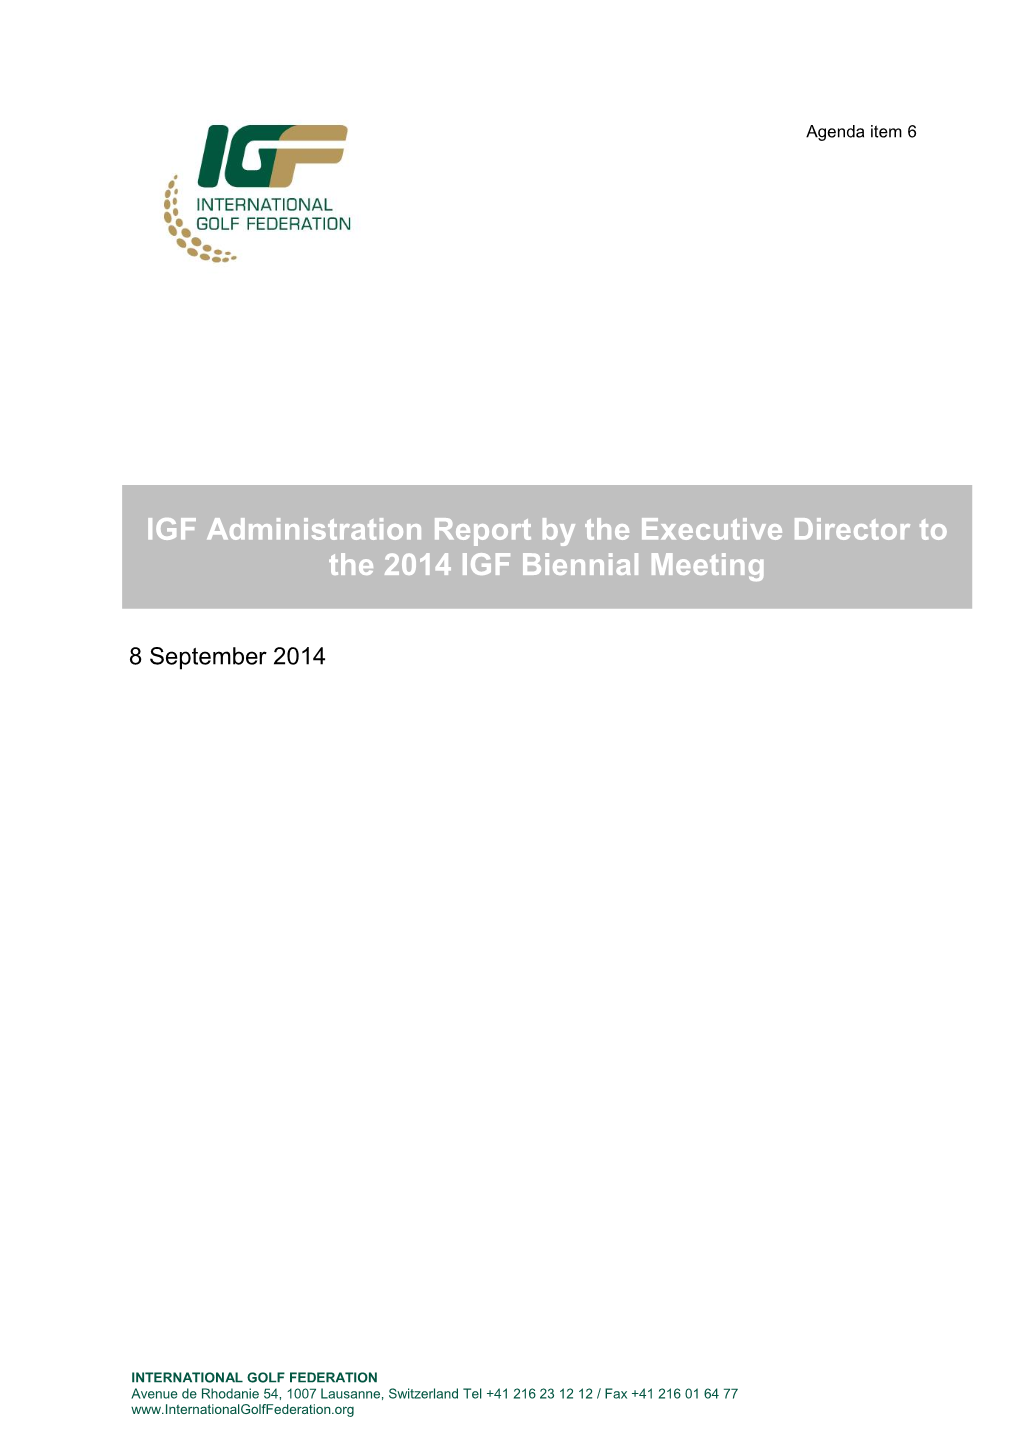 IGF Administration Report by the Executive Director to the 2014 IGF Biennial Meeting 8 September 2014 Page 2/19